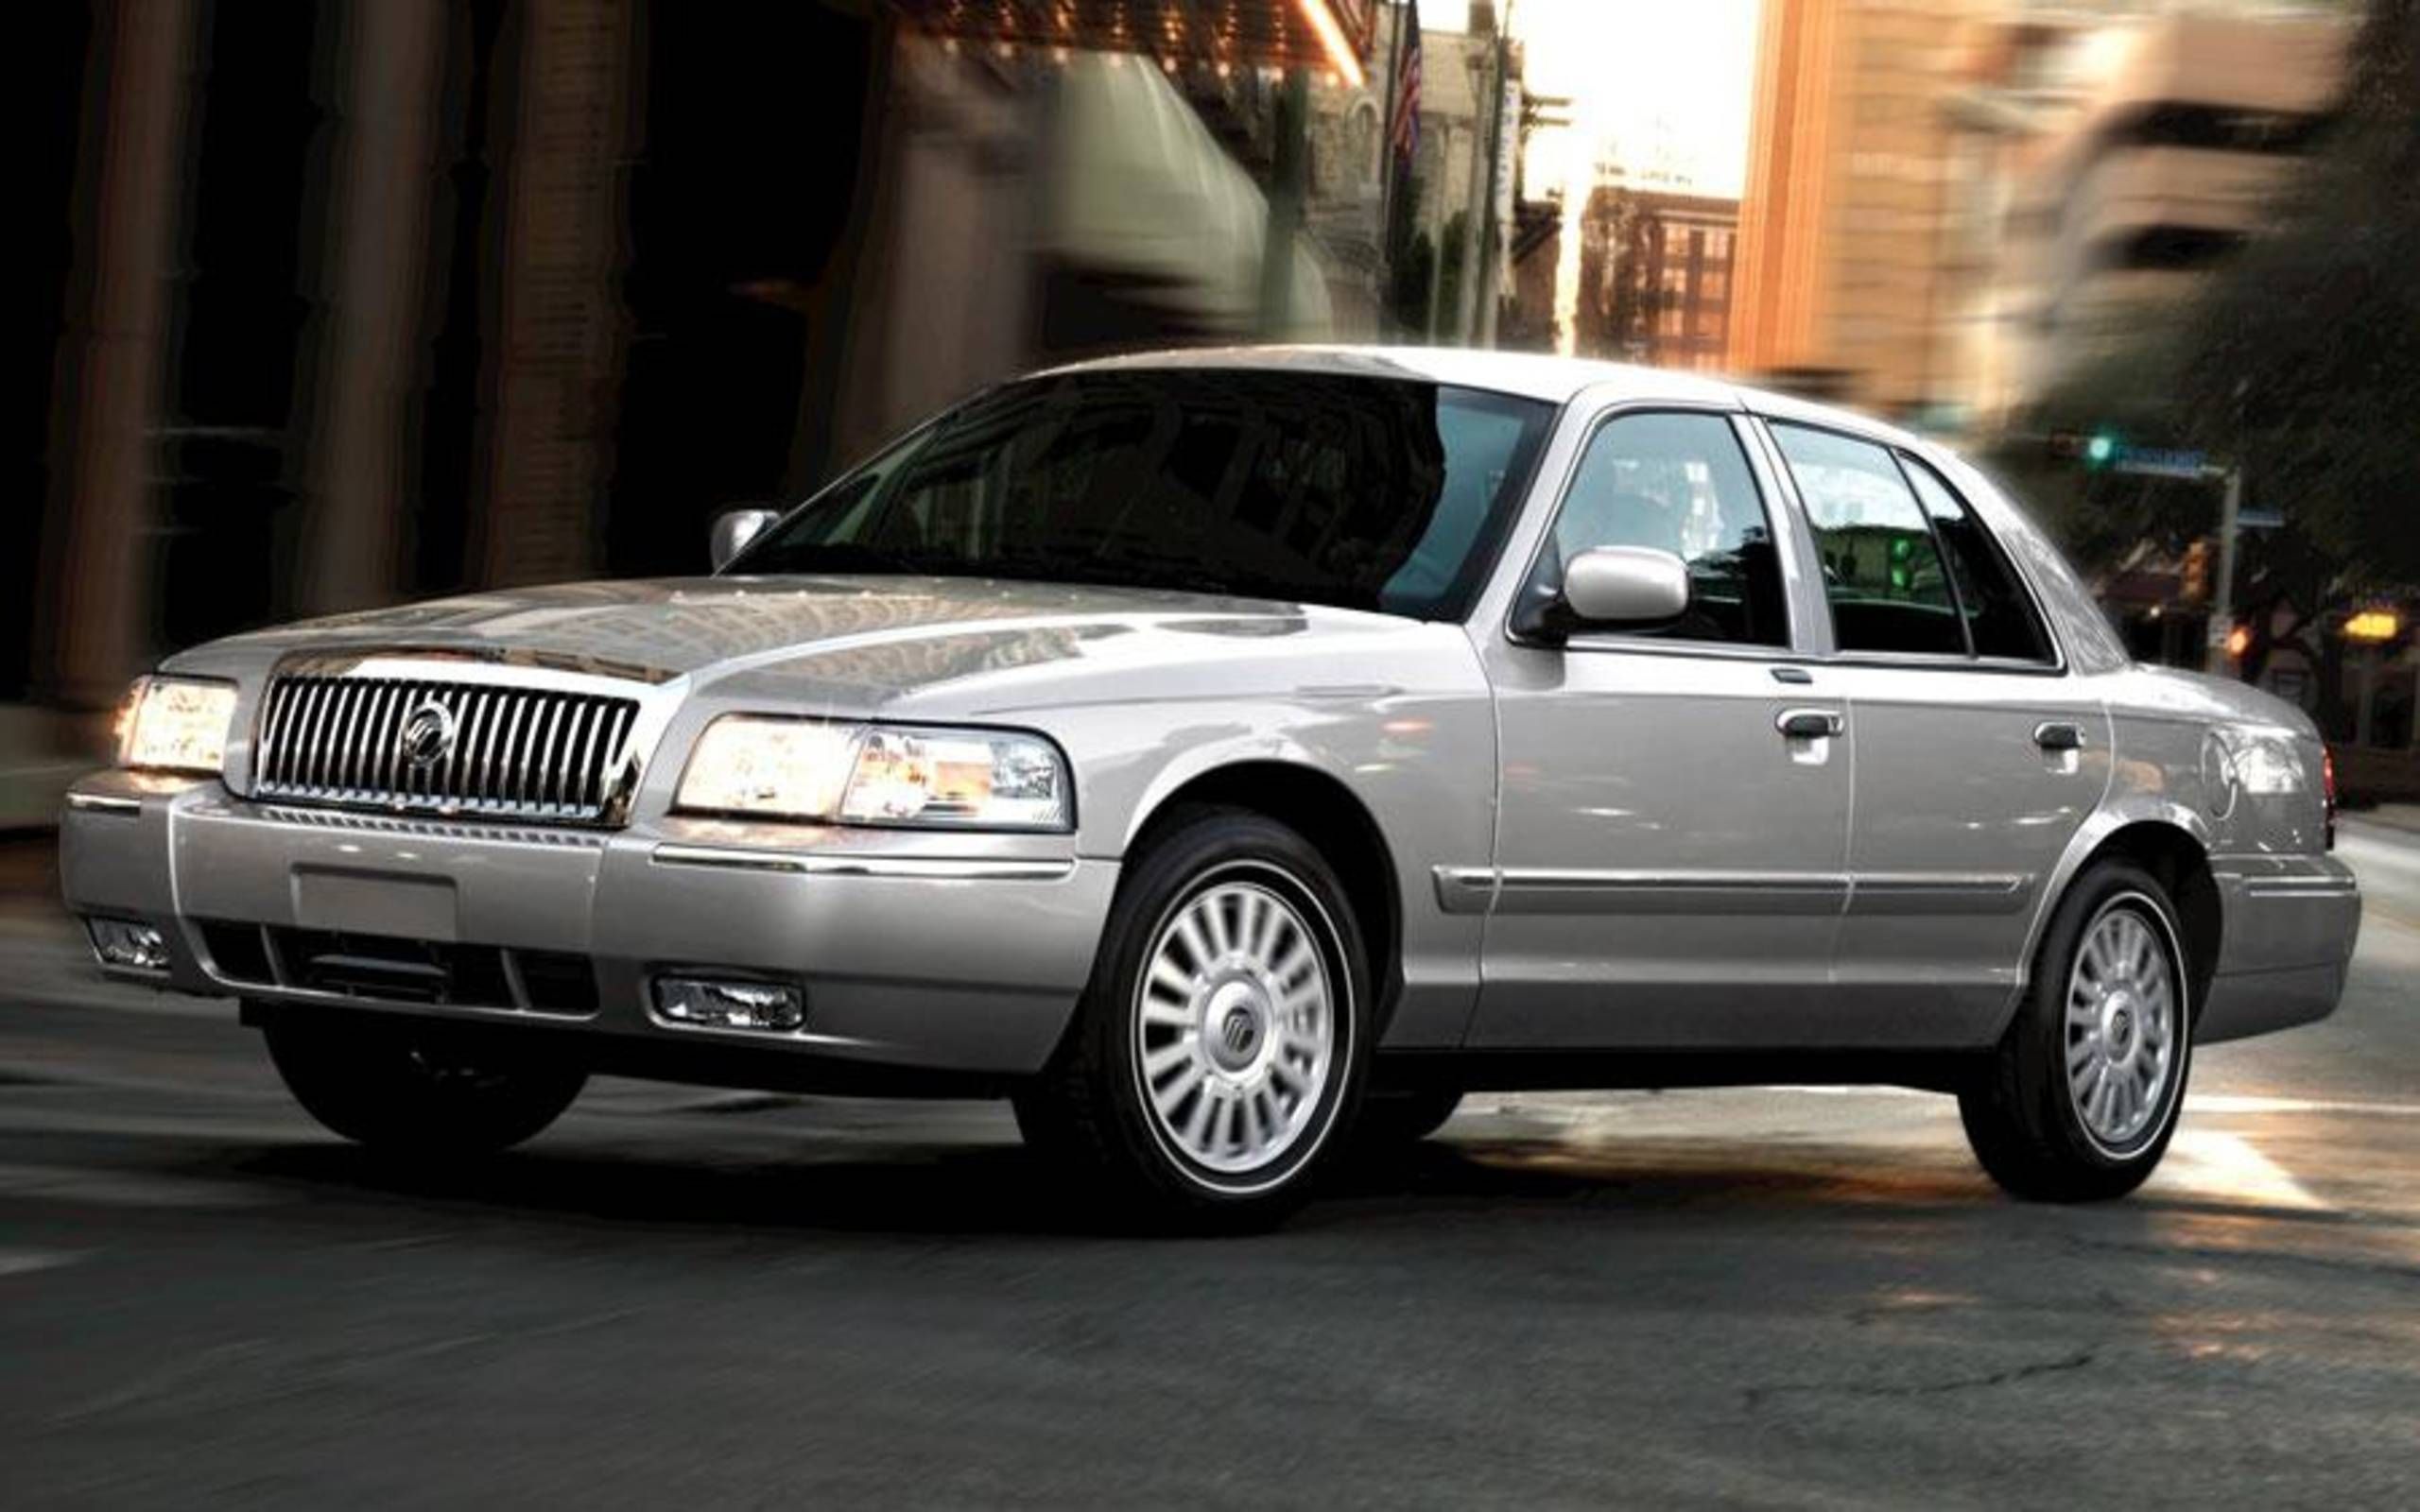 Mercury rolls into history with build of final Grand Marquis